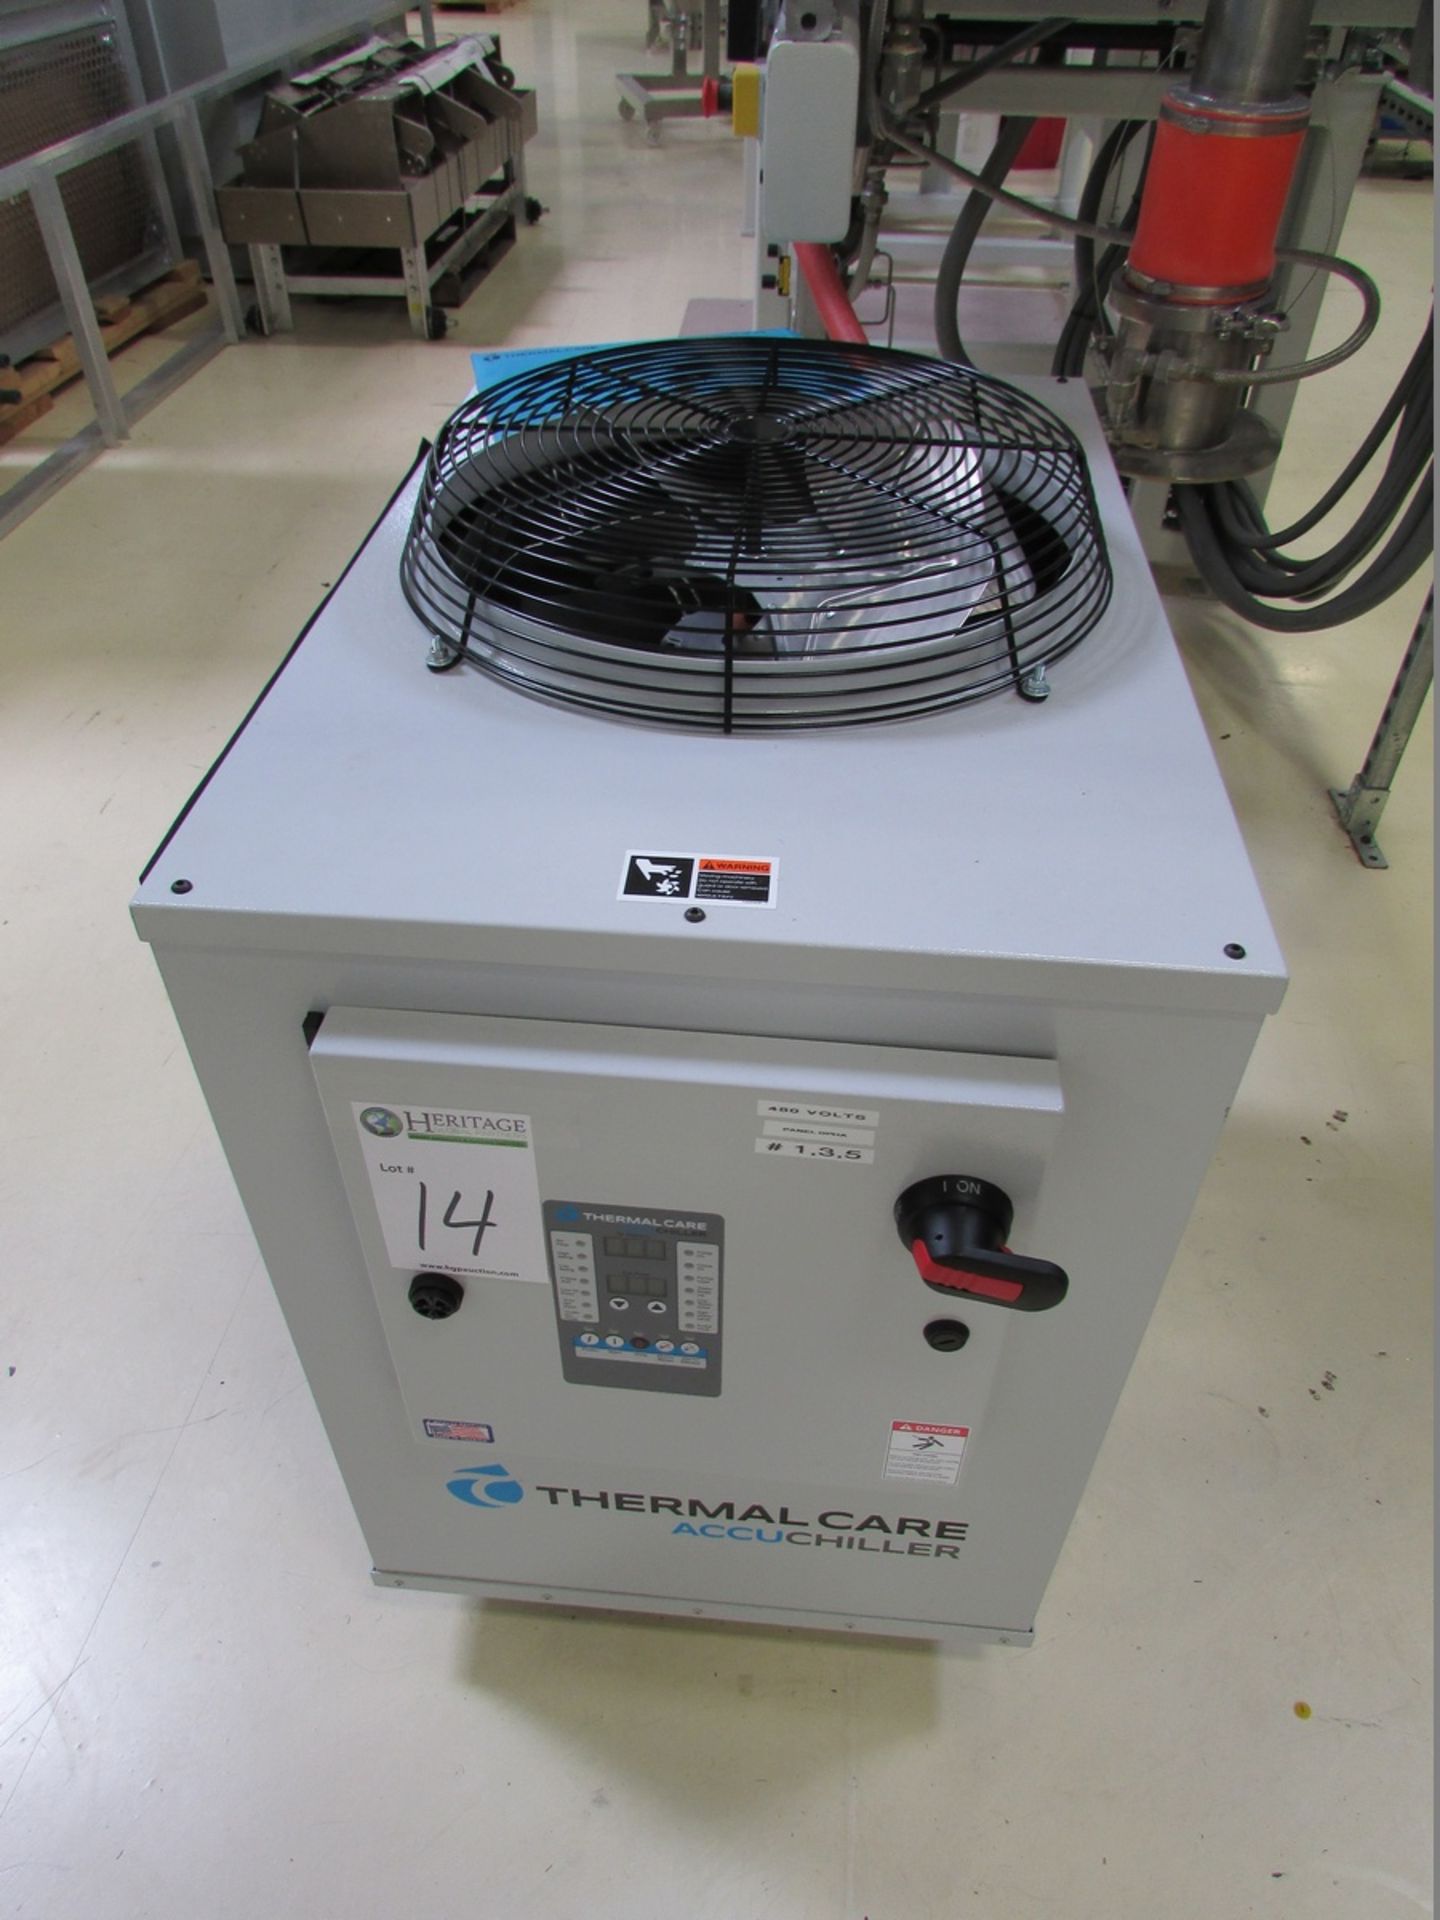 Thermal Care EQ2A03 Portable Chiller 20°F - 80°F Working Temp, 3HP Compressor, 1/2HP Condenser - Image 3 of 6